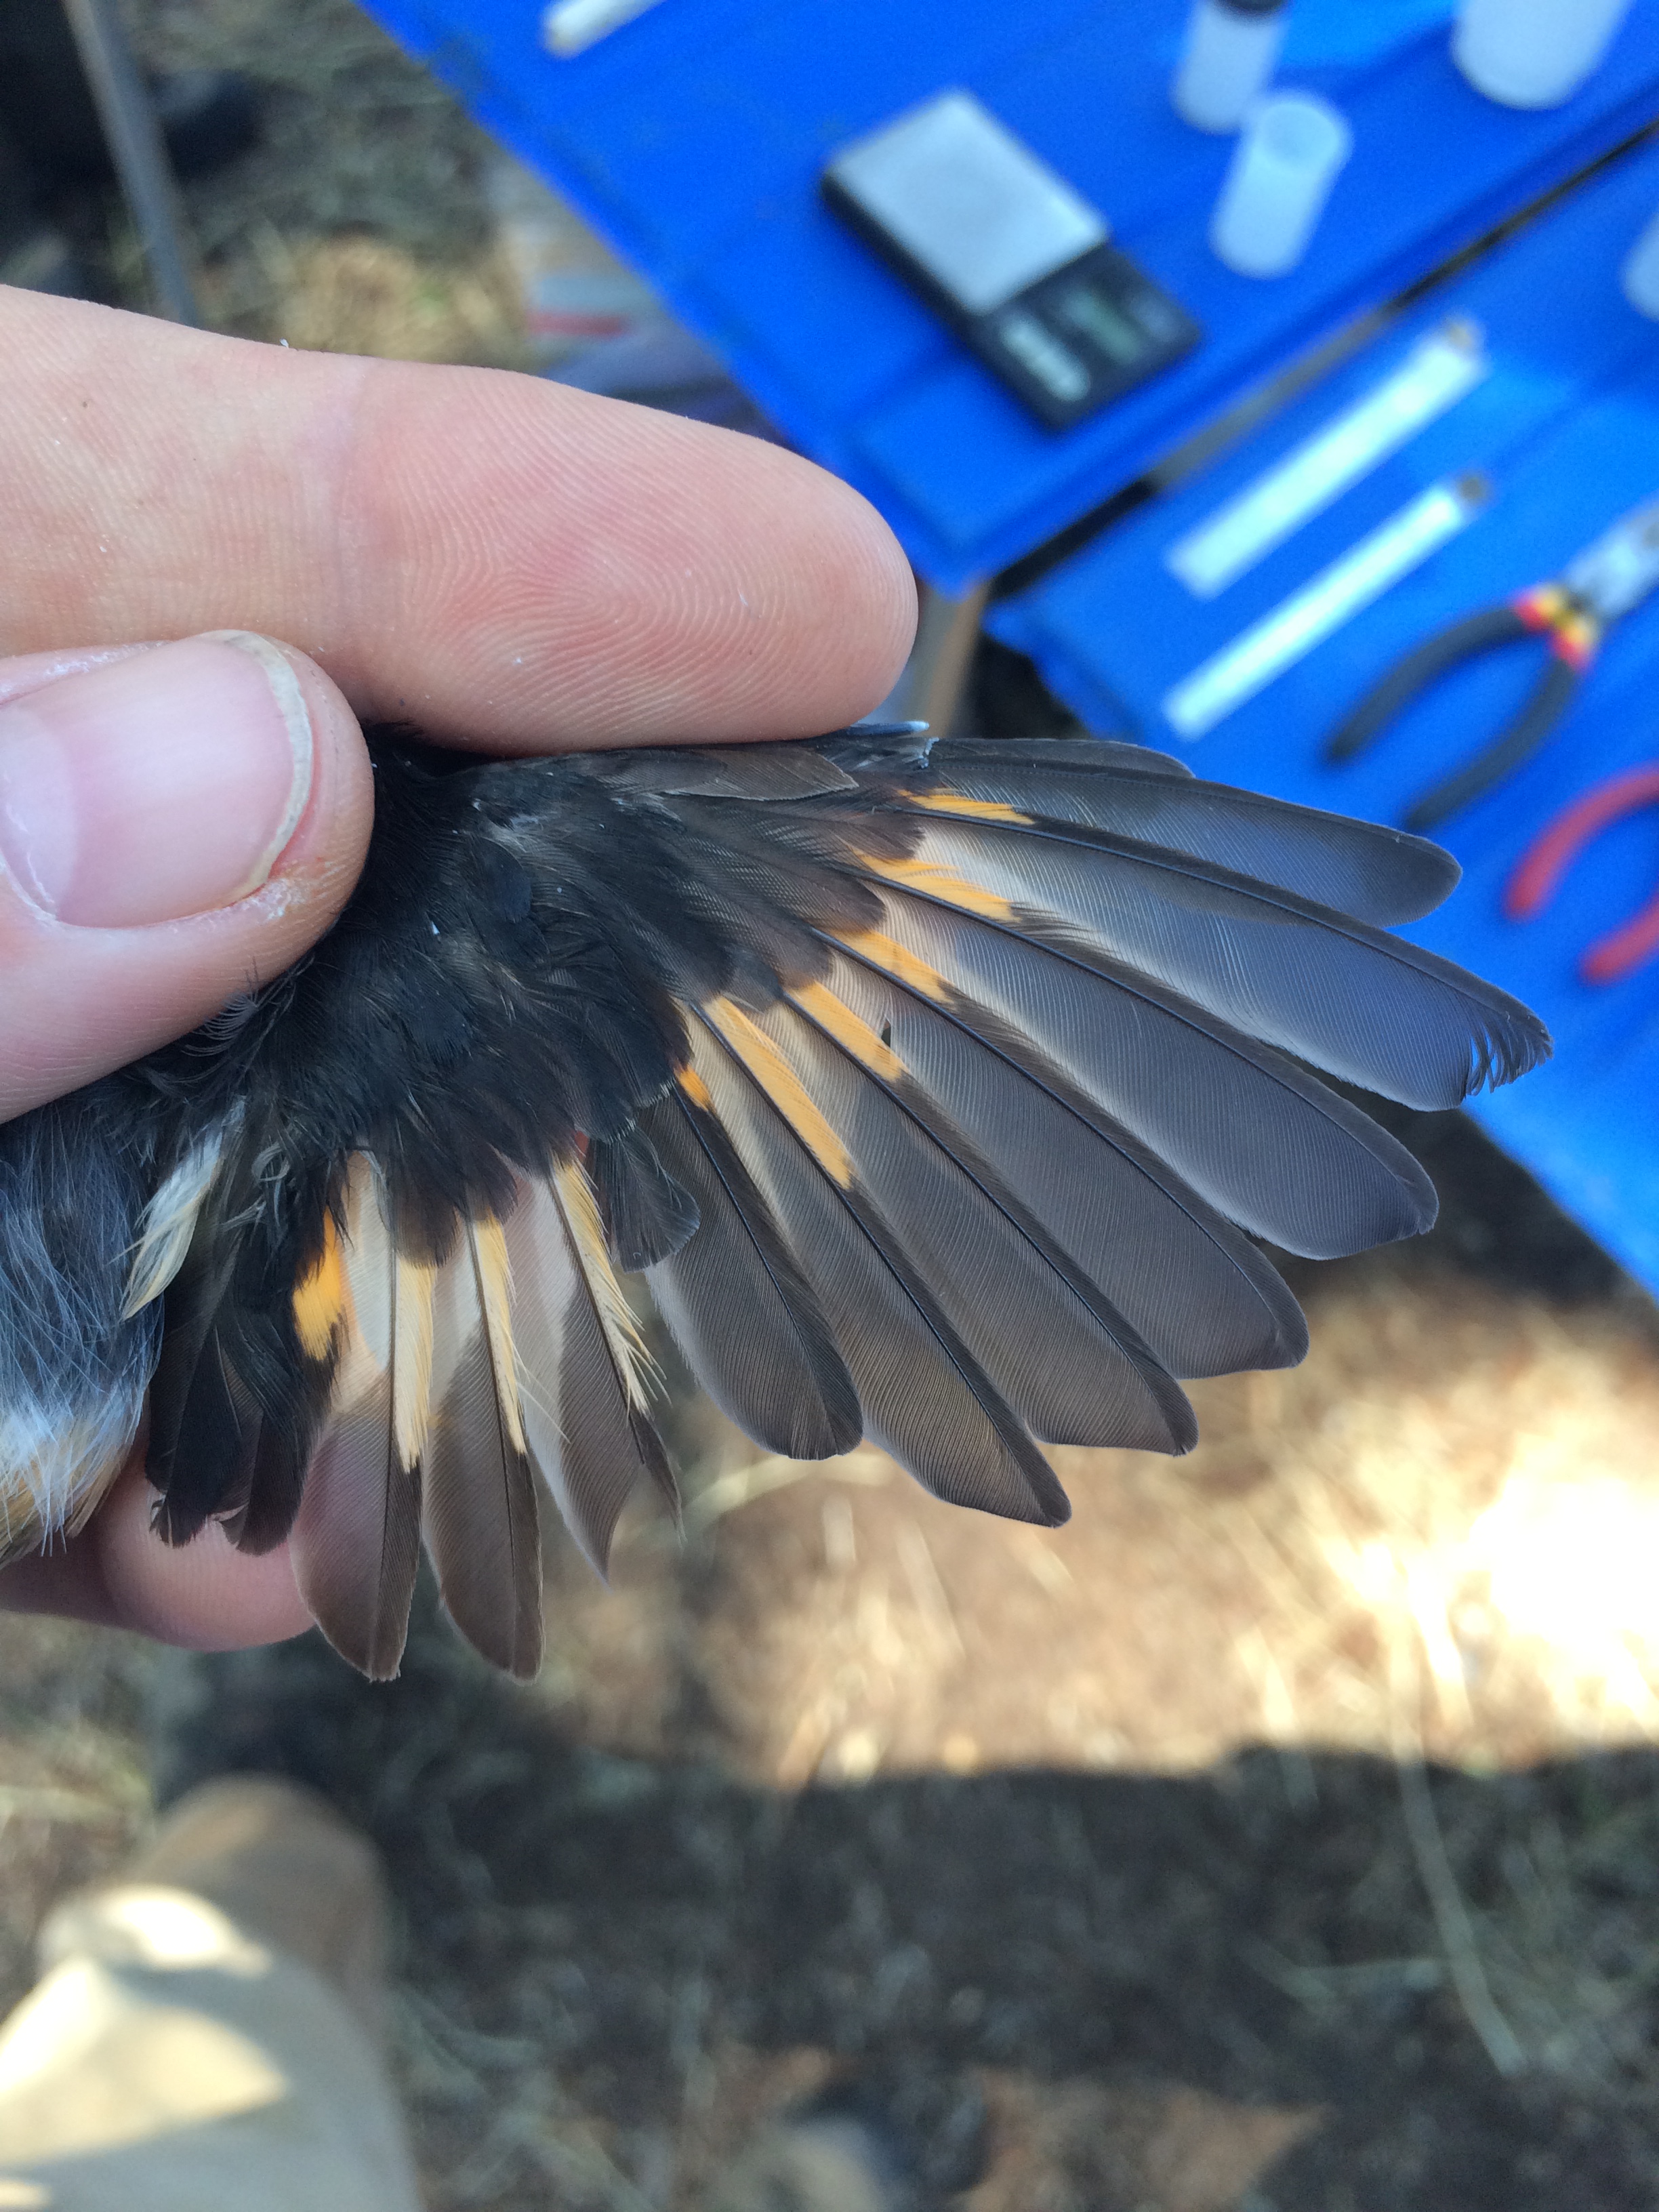 A new feather grows in the wing of an American Redstart.